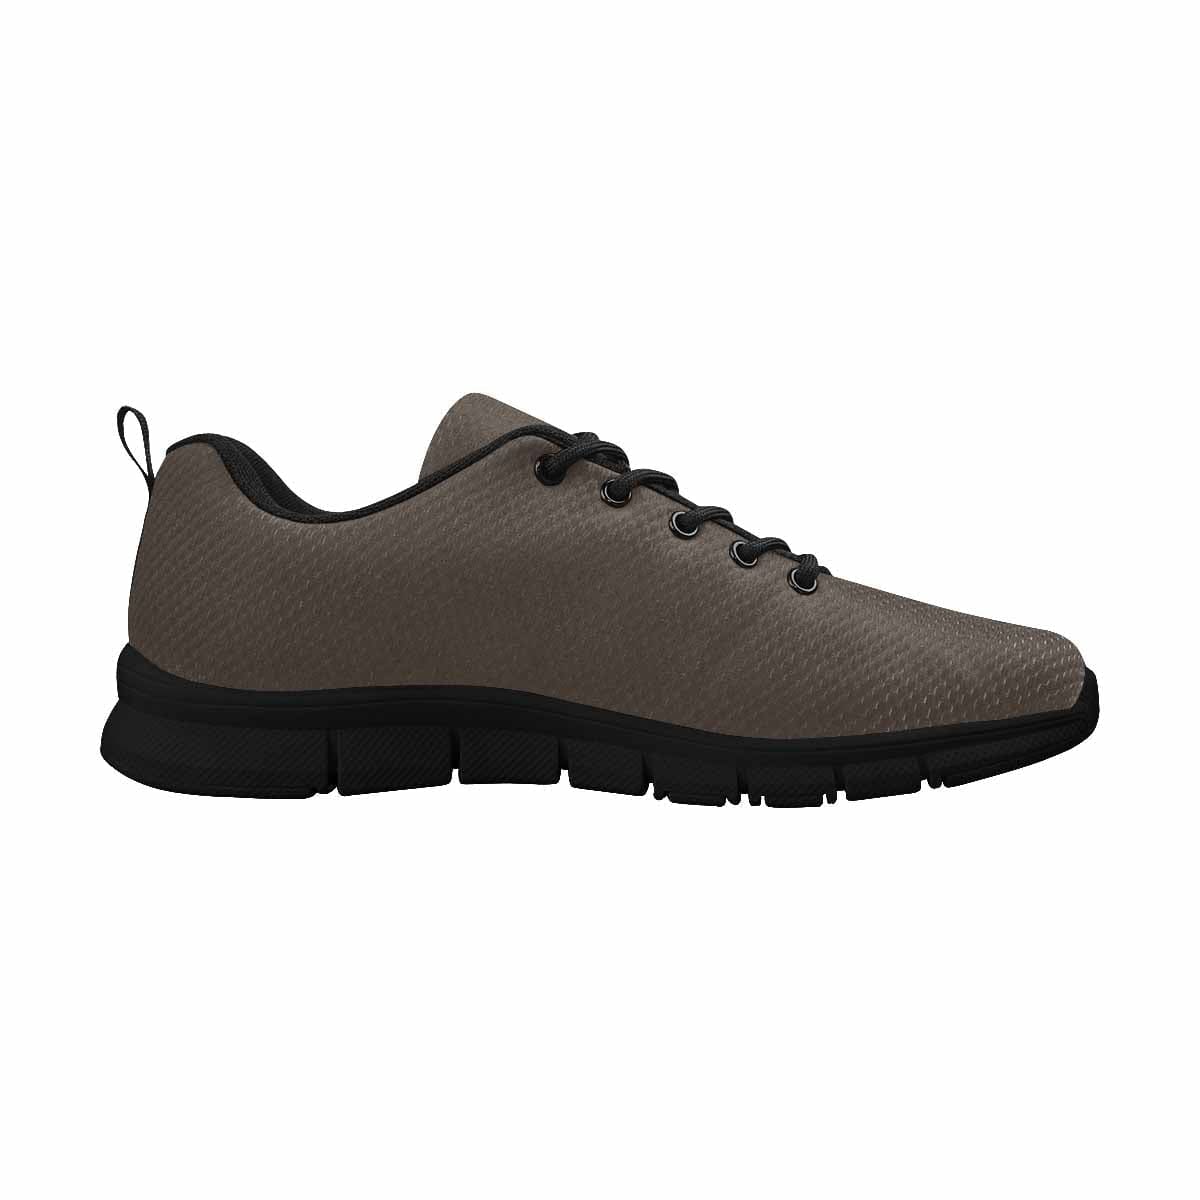 Sneakers For Men Dark Taupe Brown - Canvas Mesh Athletic Running Shoes - Mens